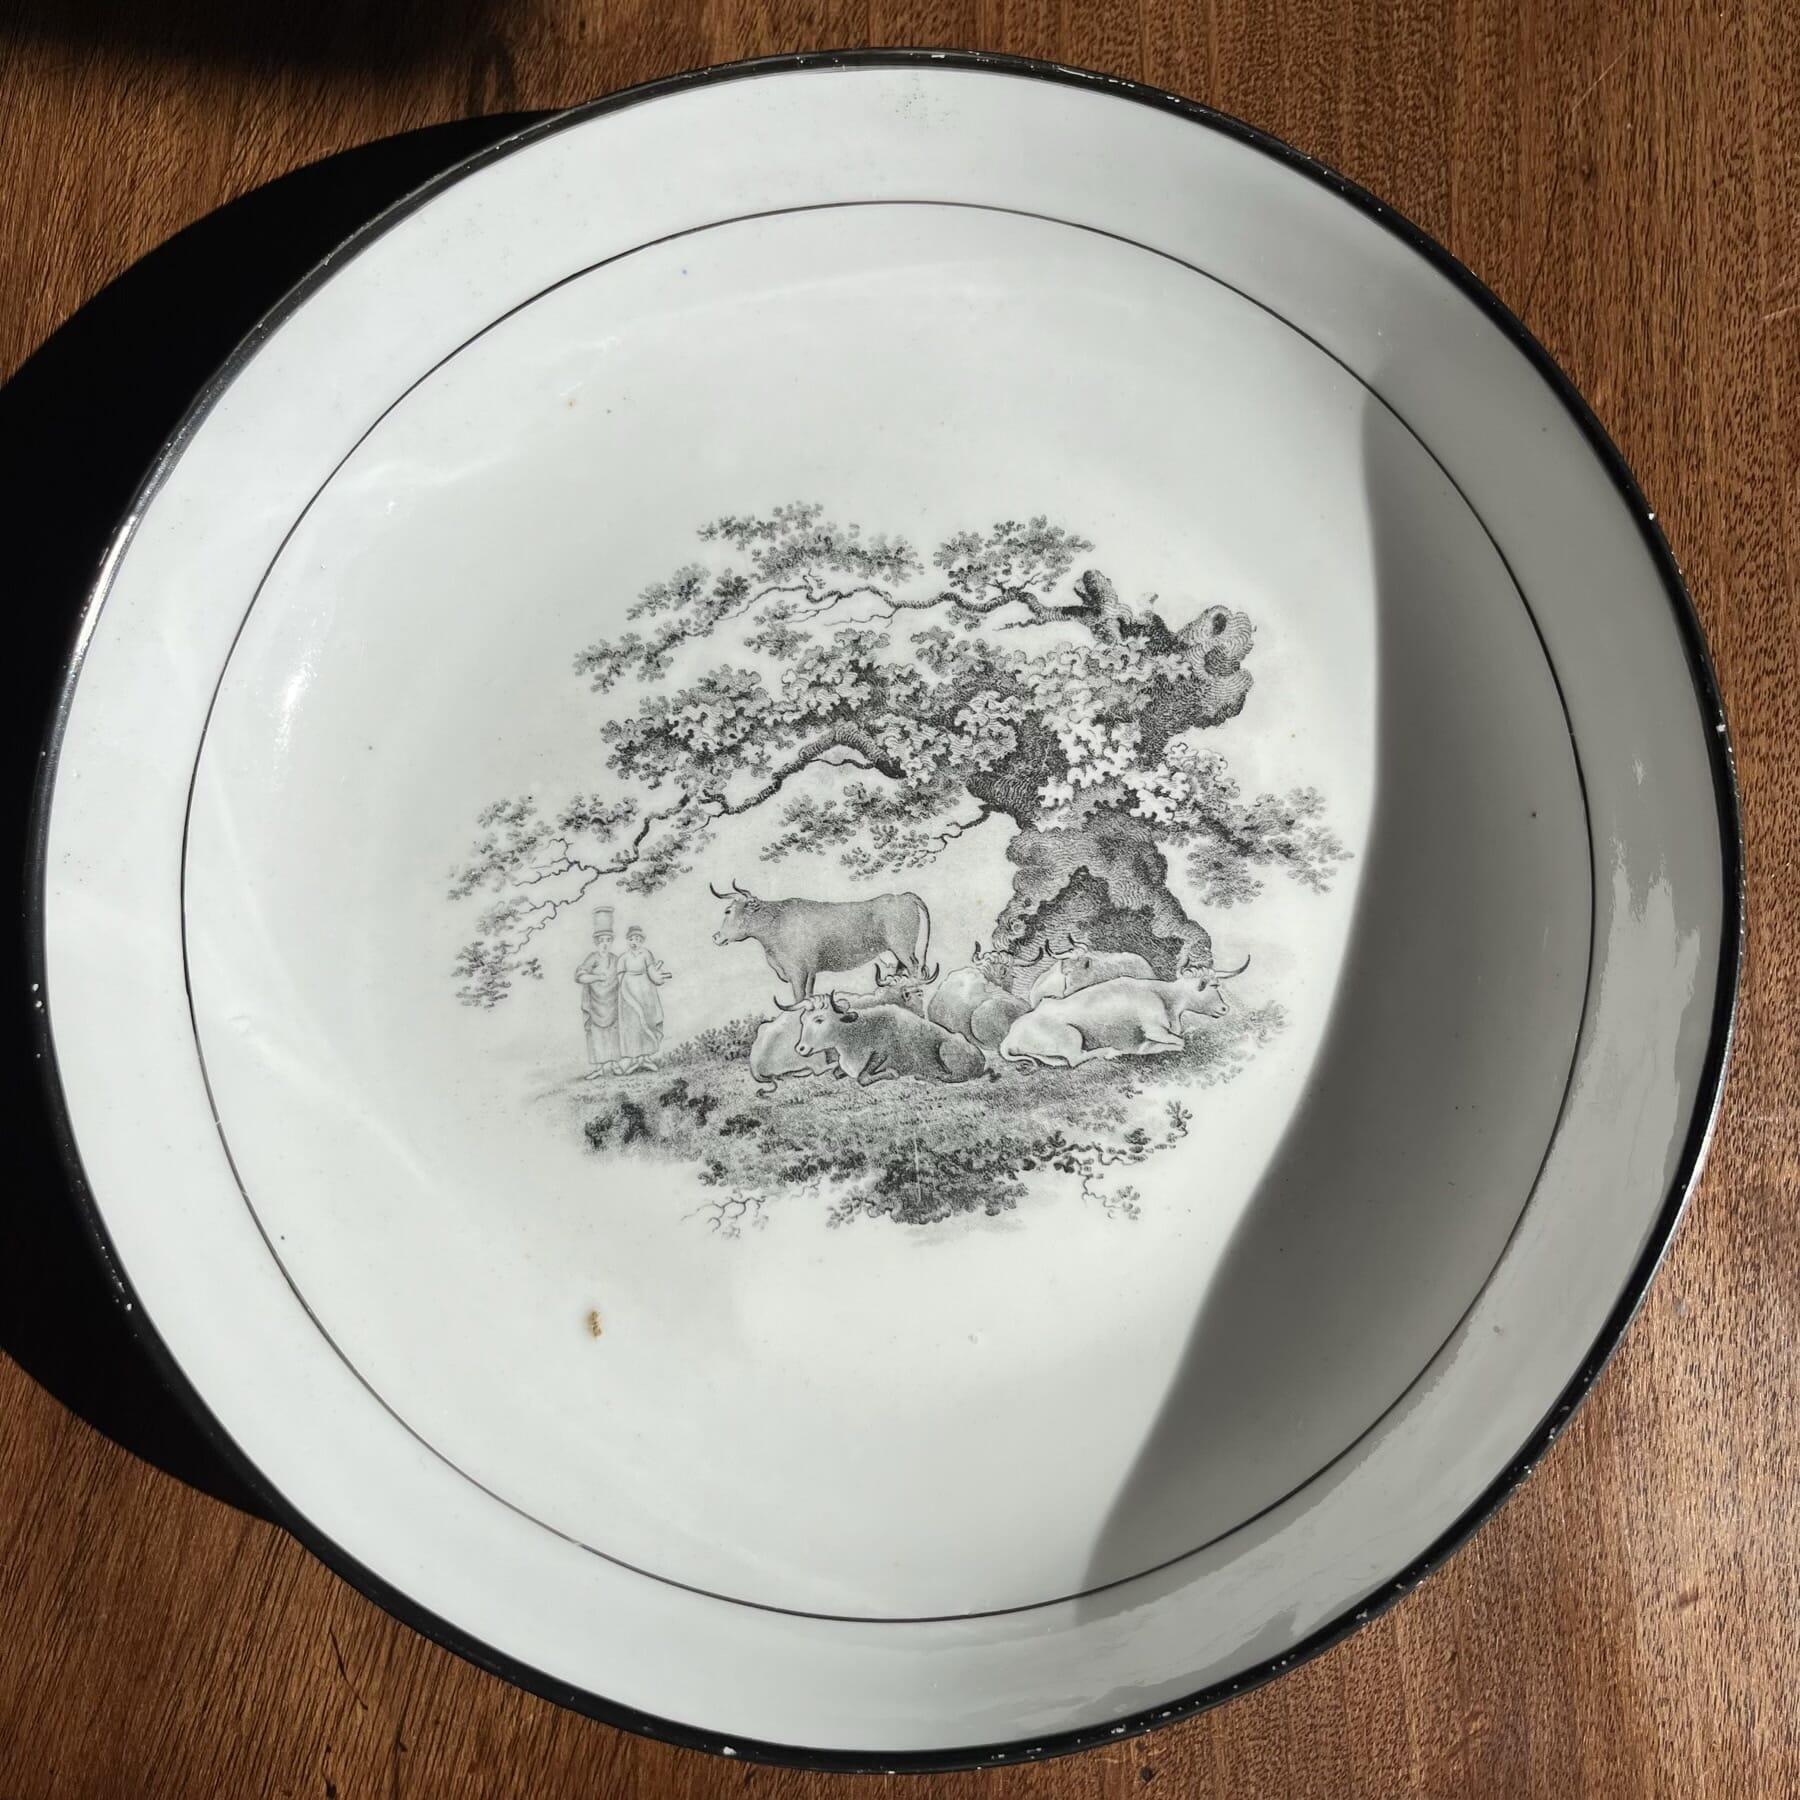 Newhall 'Newhall saucerdish bat printed with 'Waiting for the Milkmaids', c. 1820 '